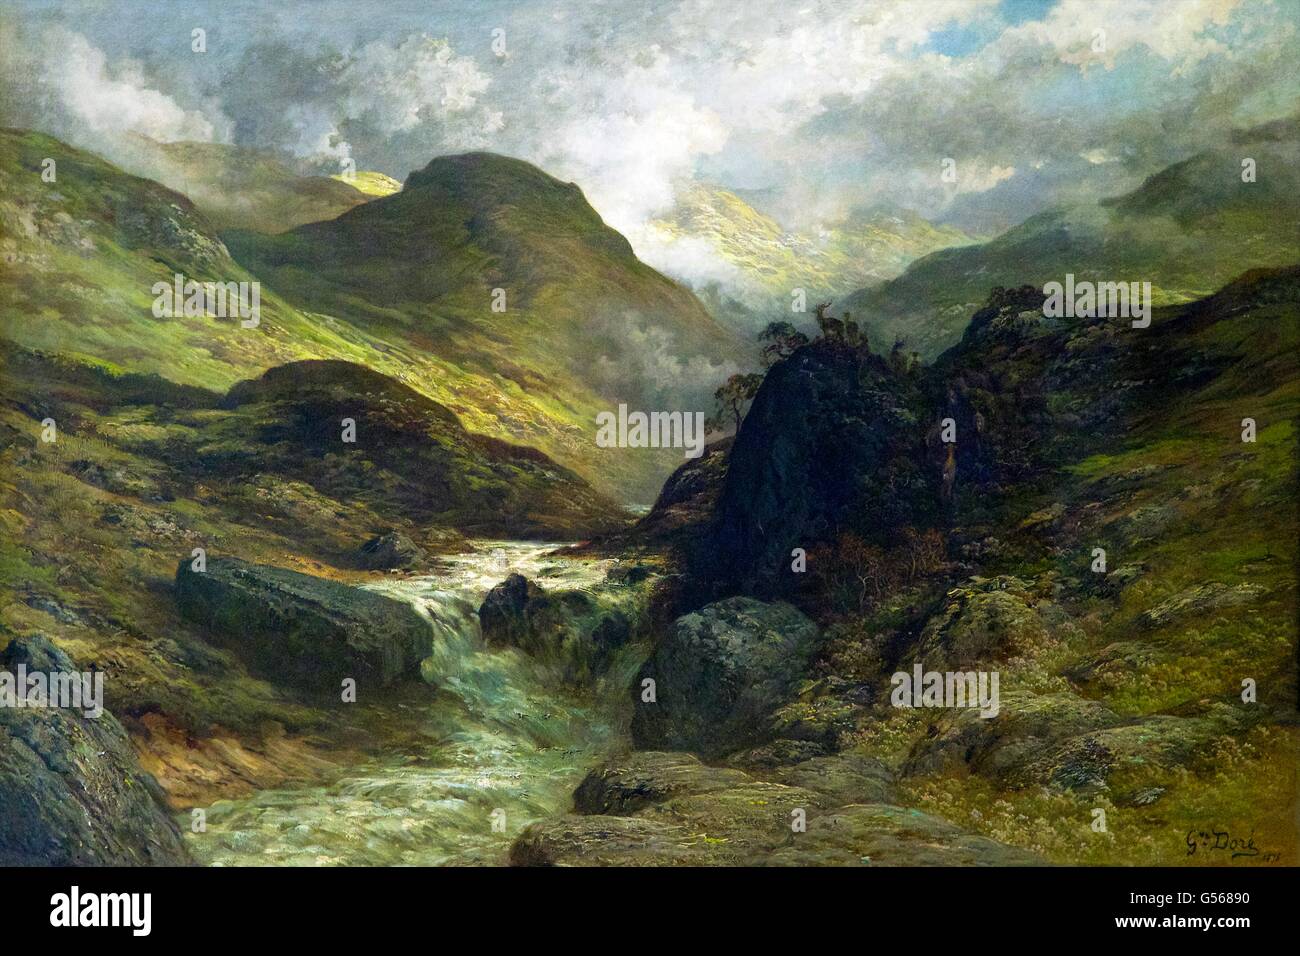 Ravine in the Mountains, by Gustave Dore, 1878, State Hermitage Museum, Saint Petersburg, Russia Stock Photo